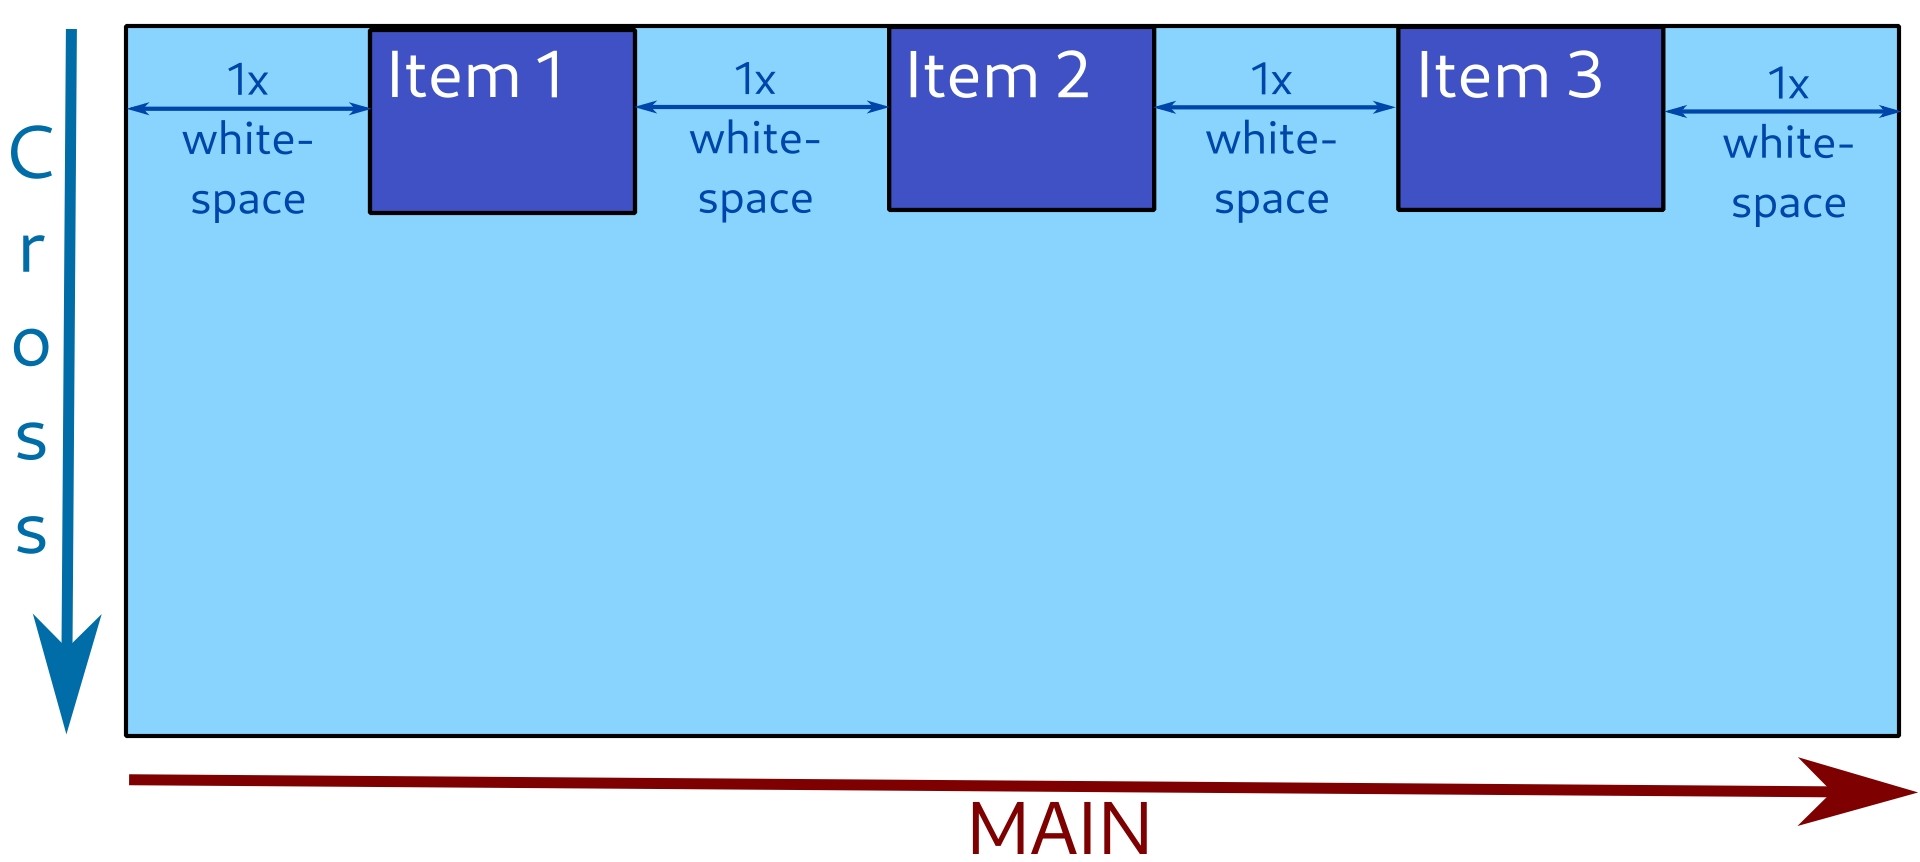 Items are distributed along main axis, with the same amount of whitespace around them.